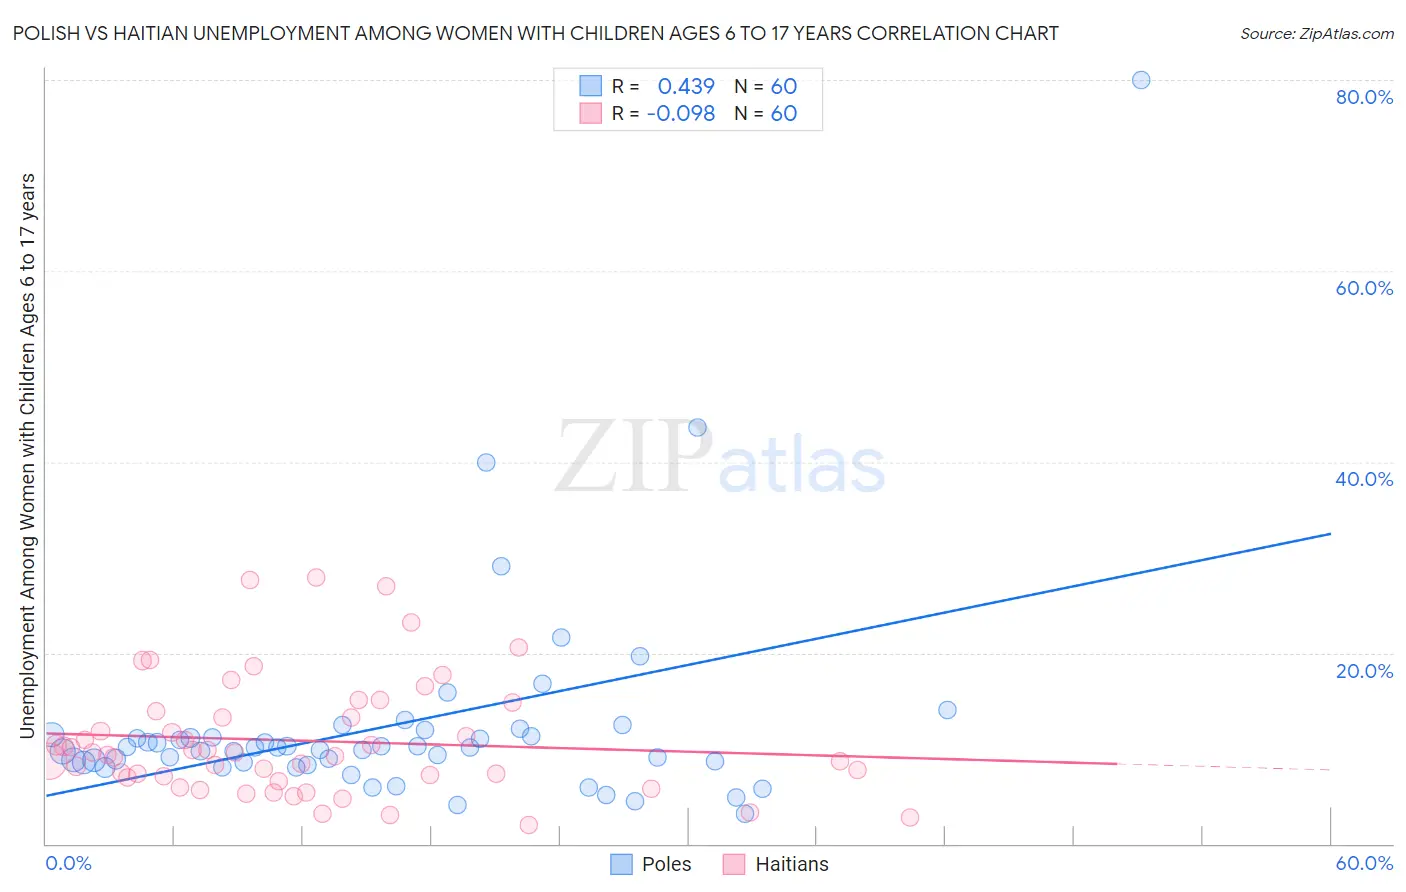 Polish vs Haitian Unemployment Among Women with Children Ages 6 to 17 years